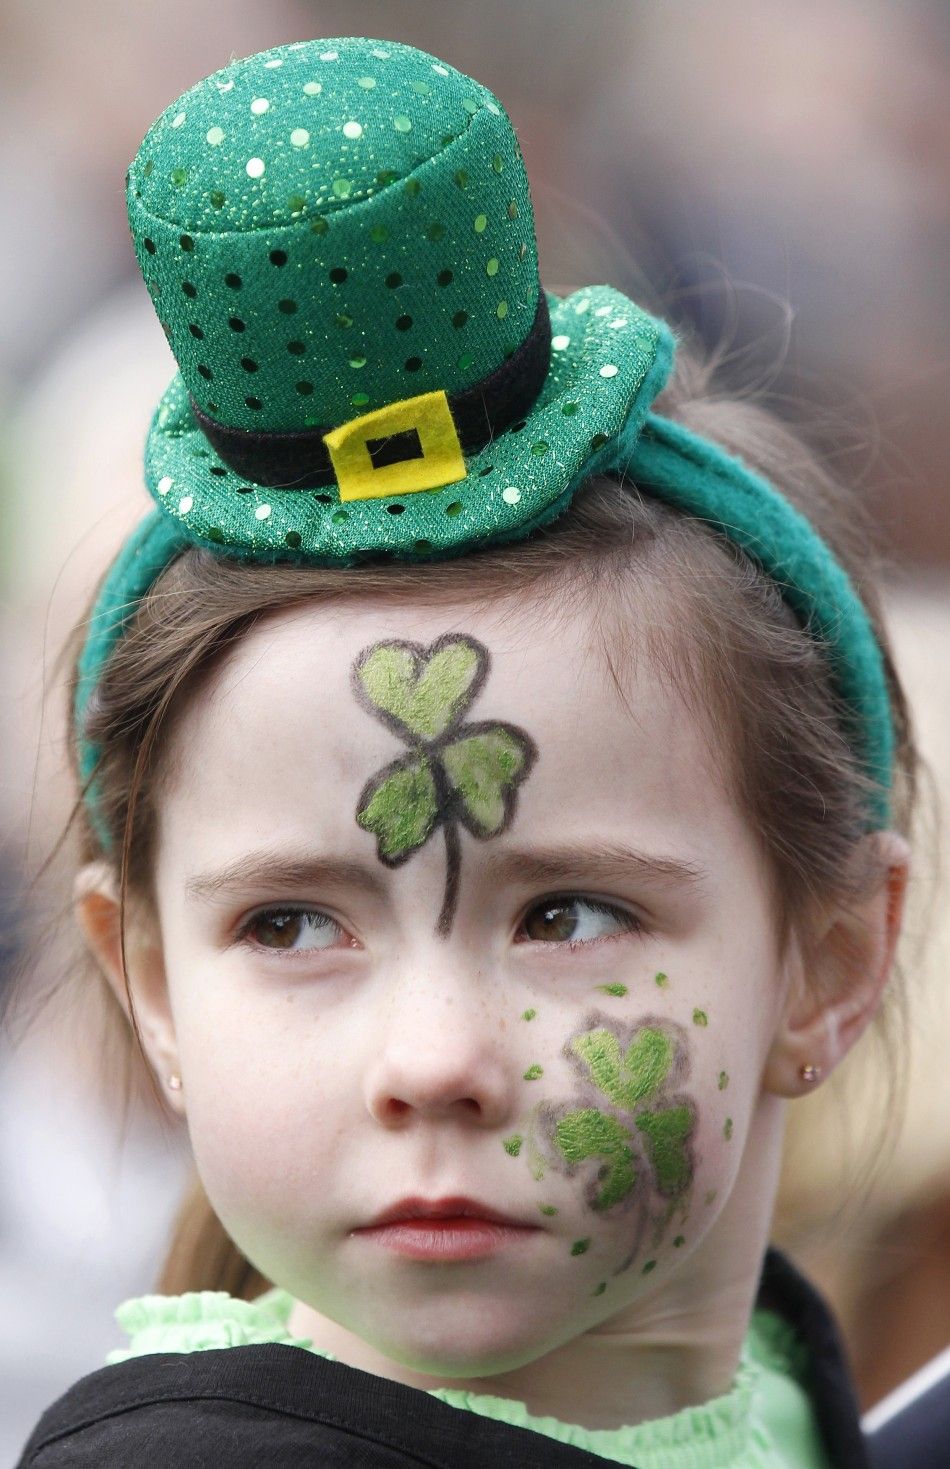 A young girl with her face painted watches the annual St. Patricks Day parade in Belfast, Northern Ireland March 17, 2011. 